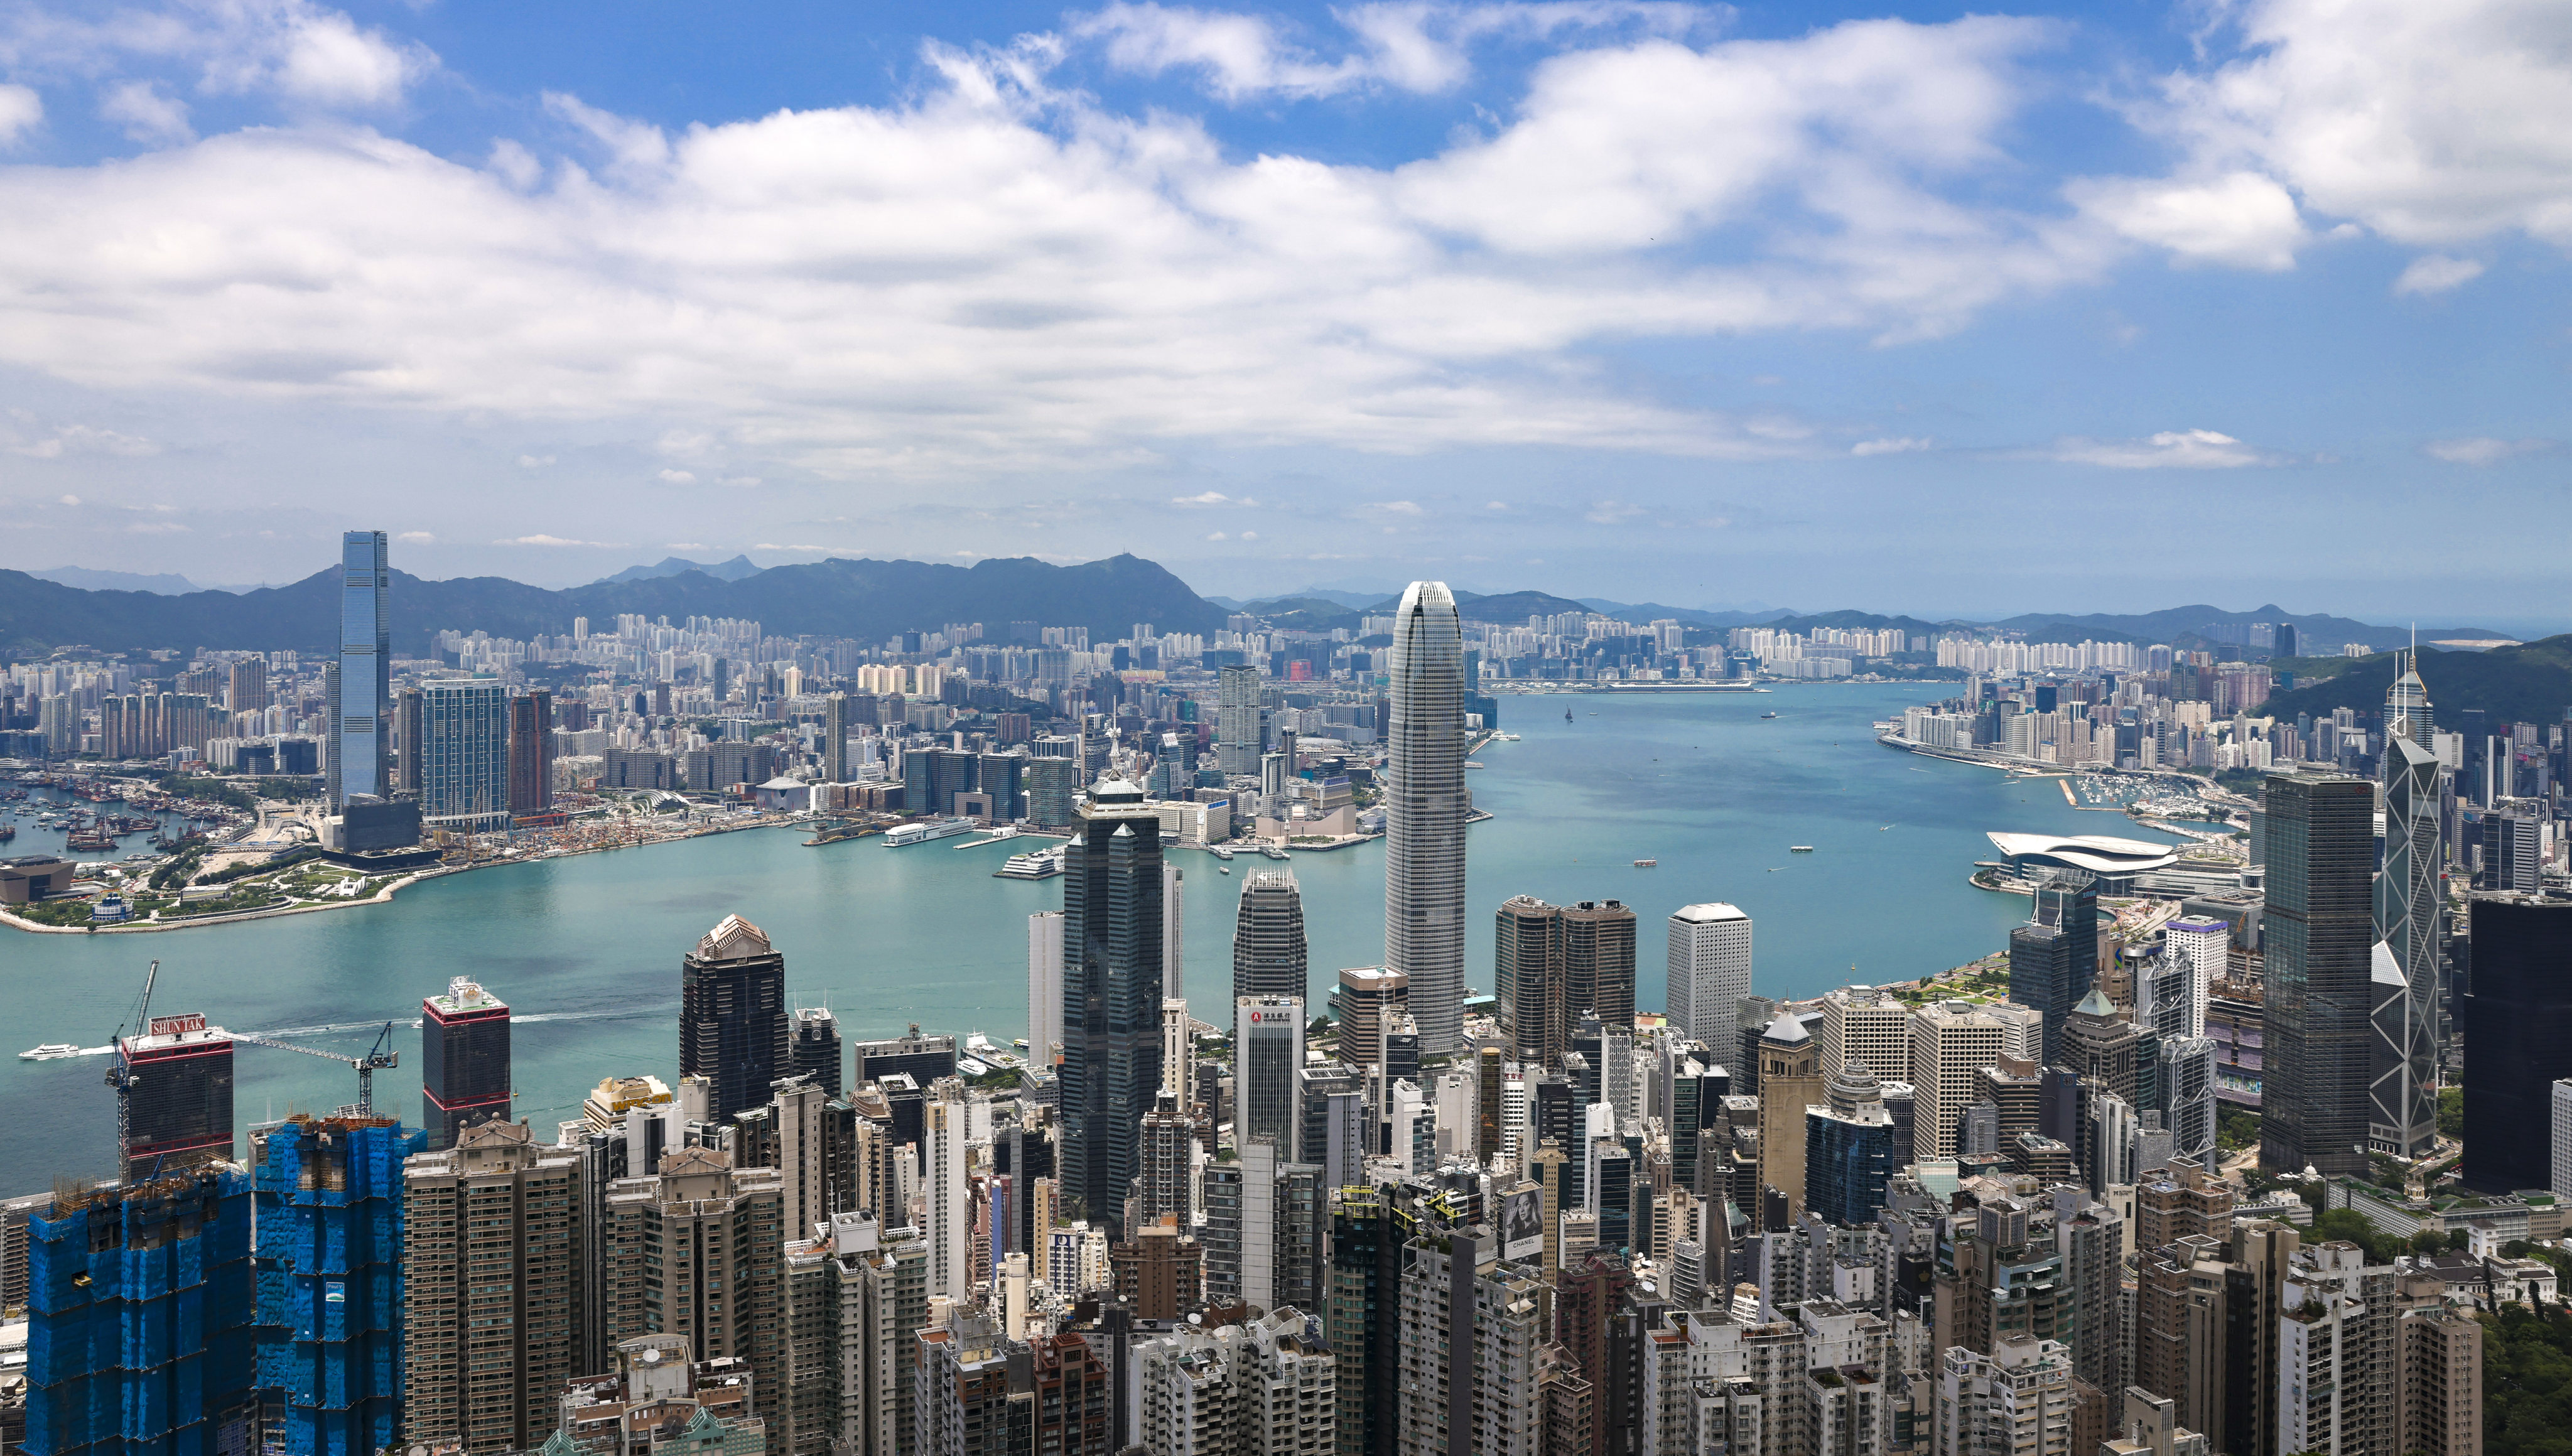 View of Hong Kong skyline from The Peak on Hong Kong Island on 17 May 2022. Photo: K. Y. Cheng